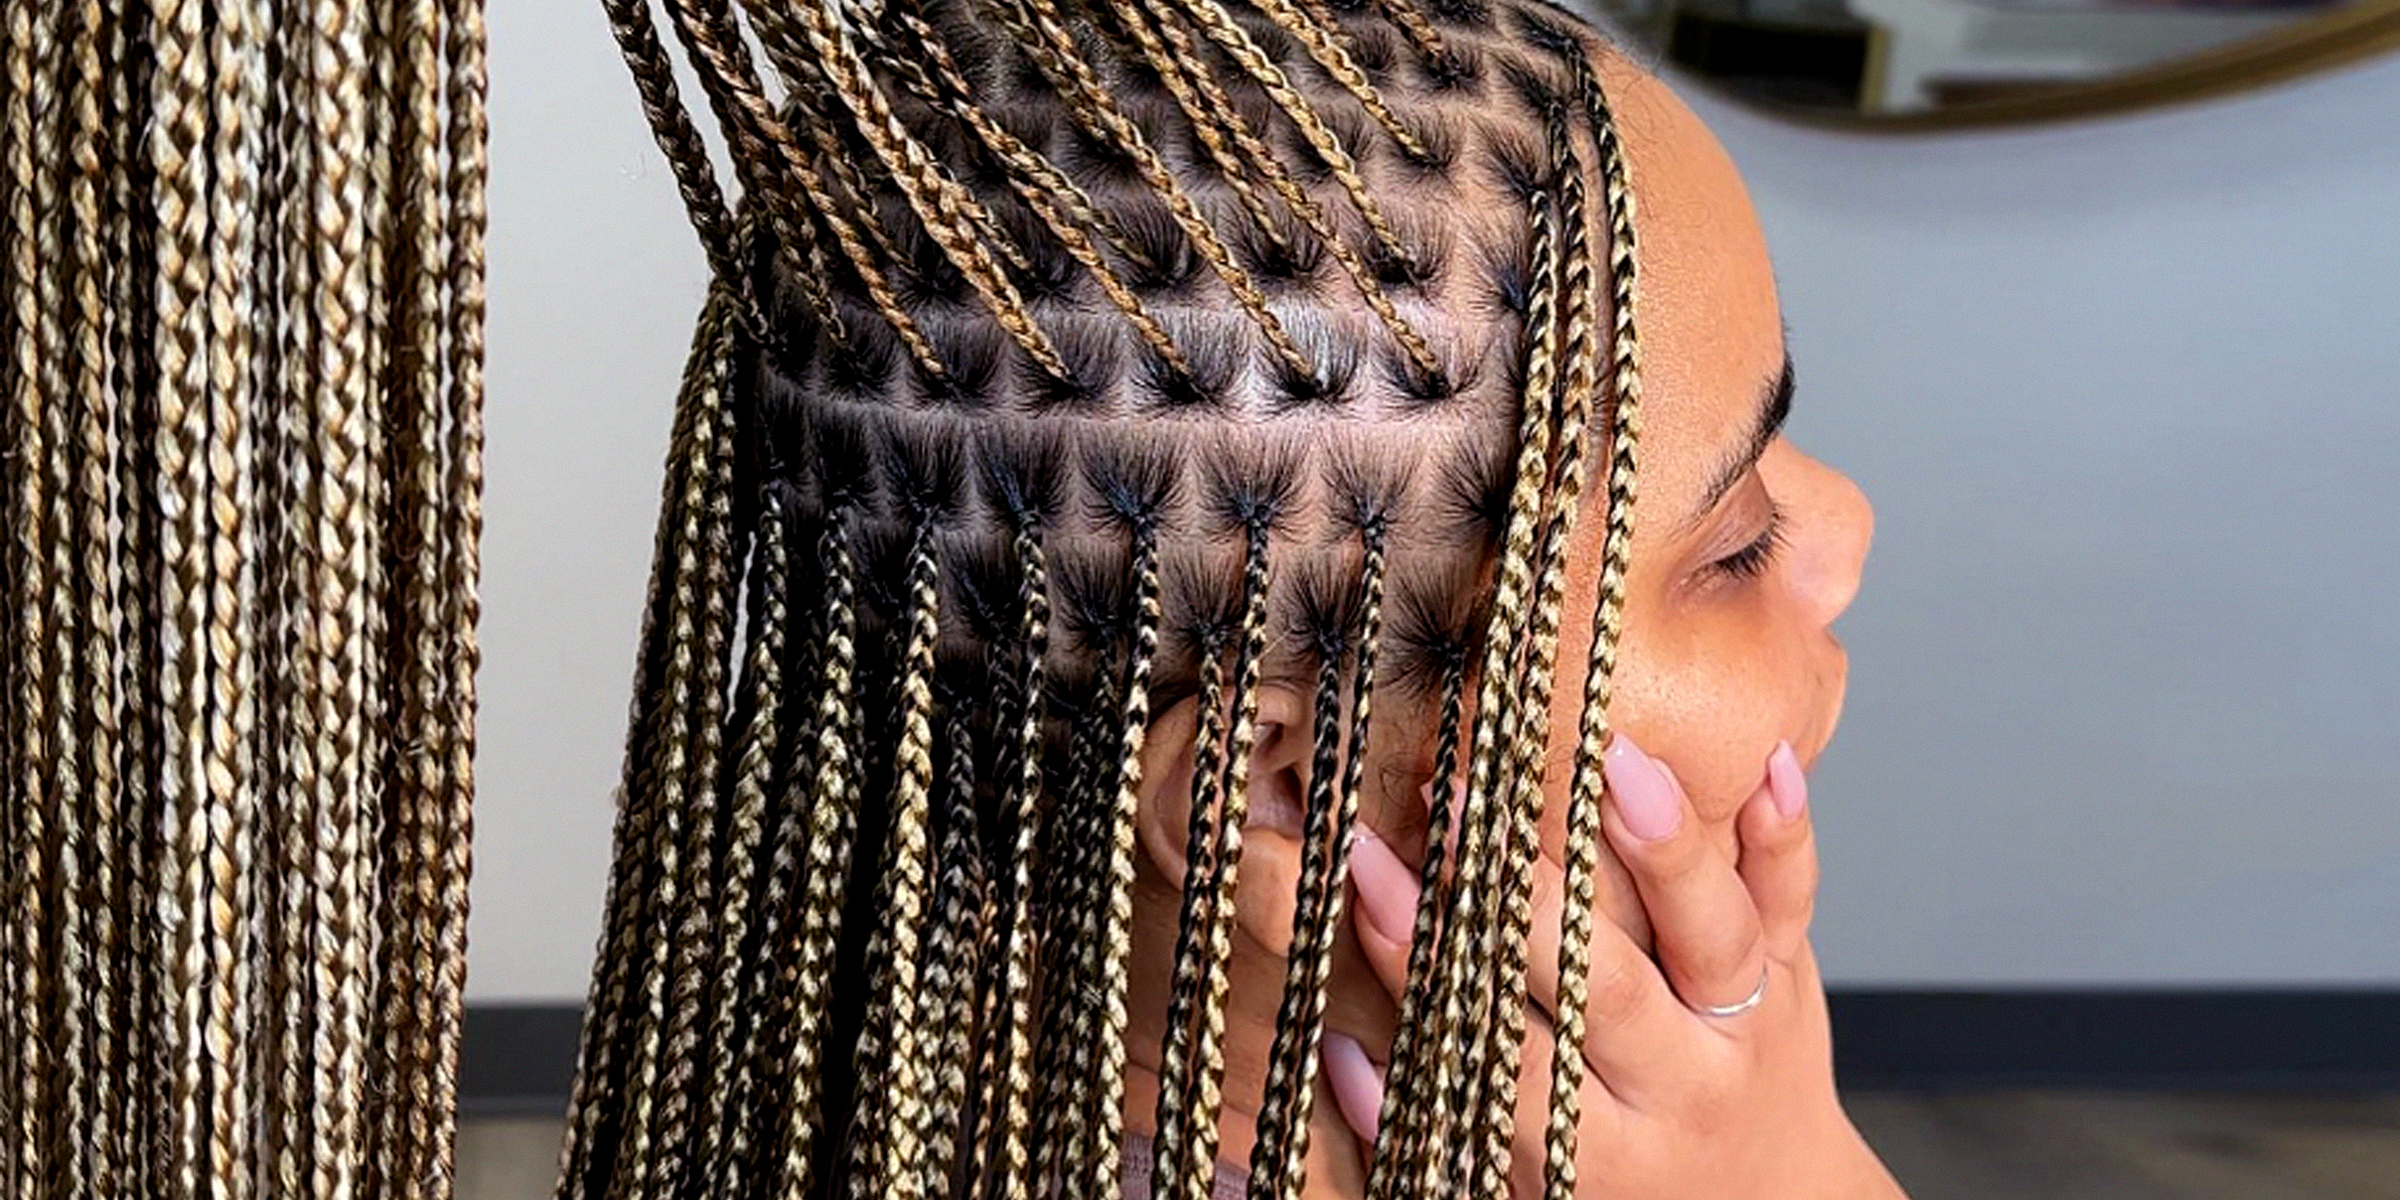 A woman with knotless braids | Source: Instagram/houstonbraidstyle